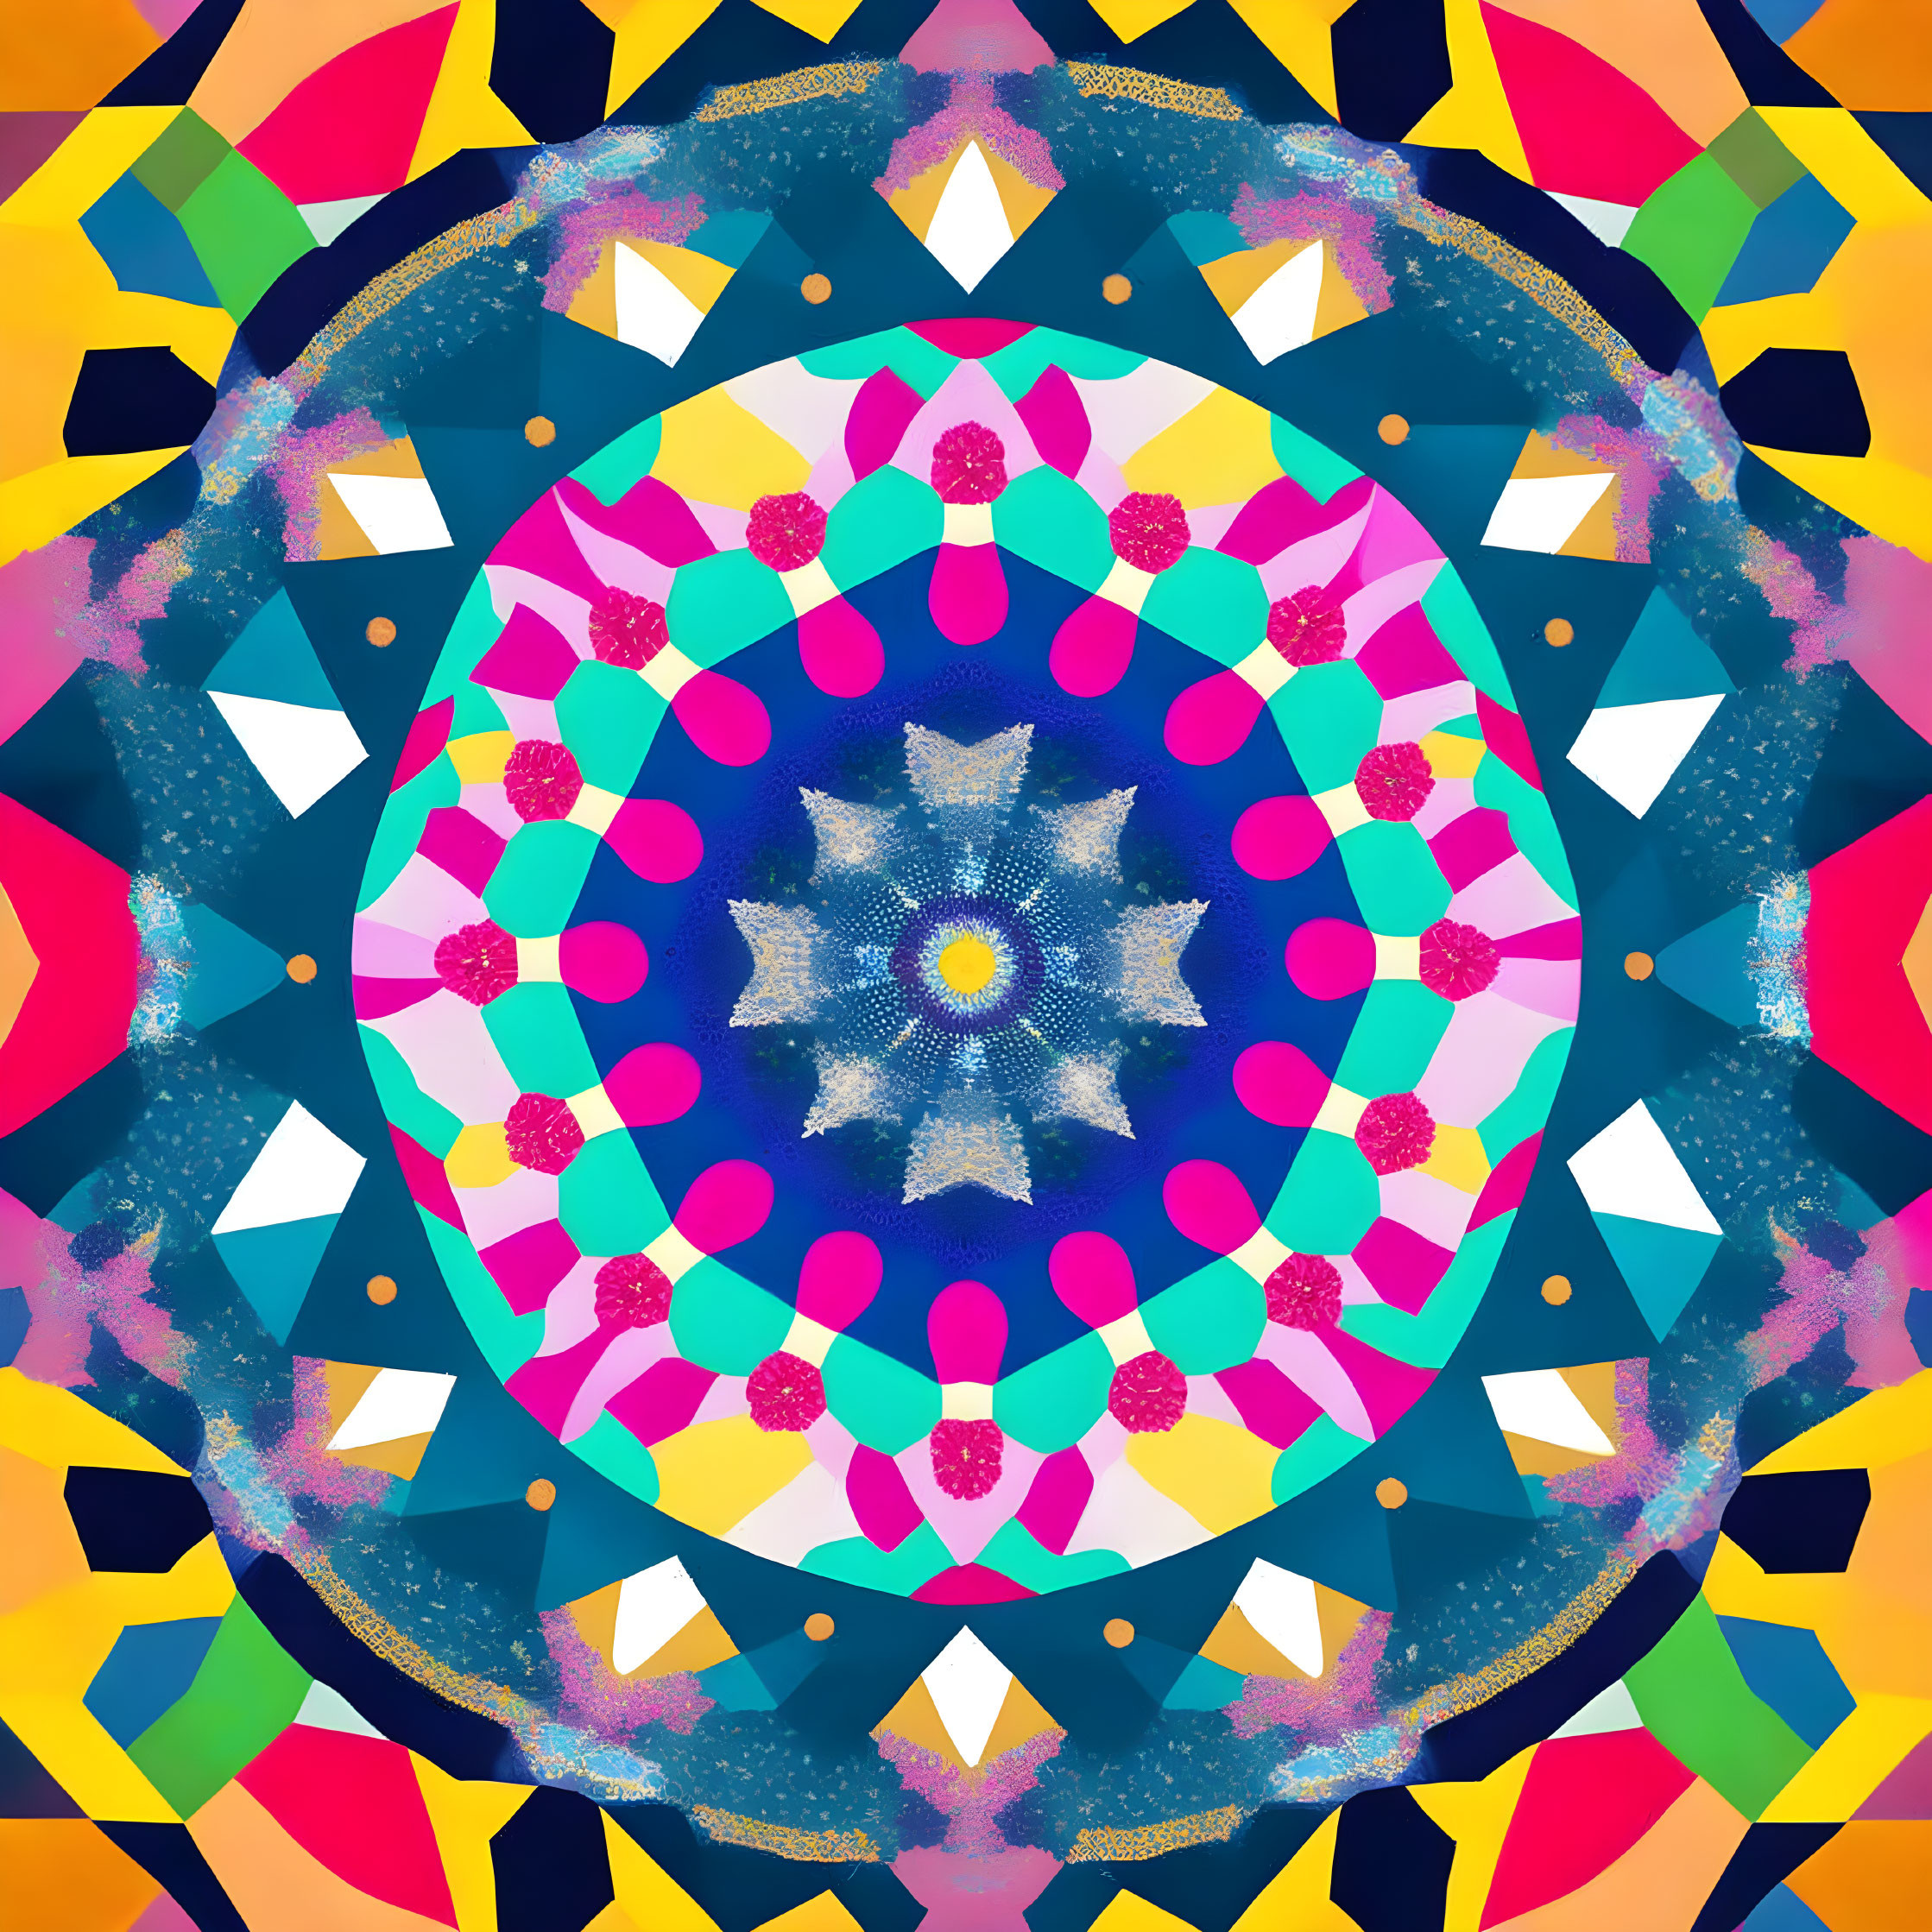 Colorful Symmetrical Geometric Pattern in Vibrant Hues